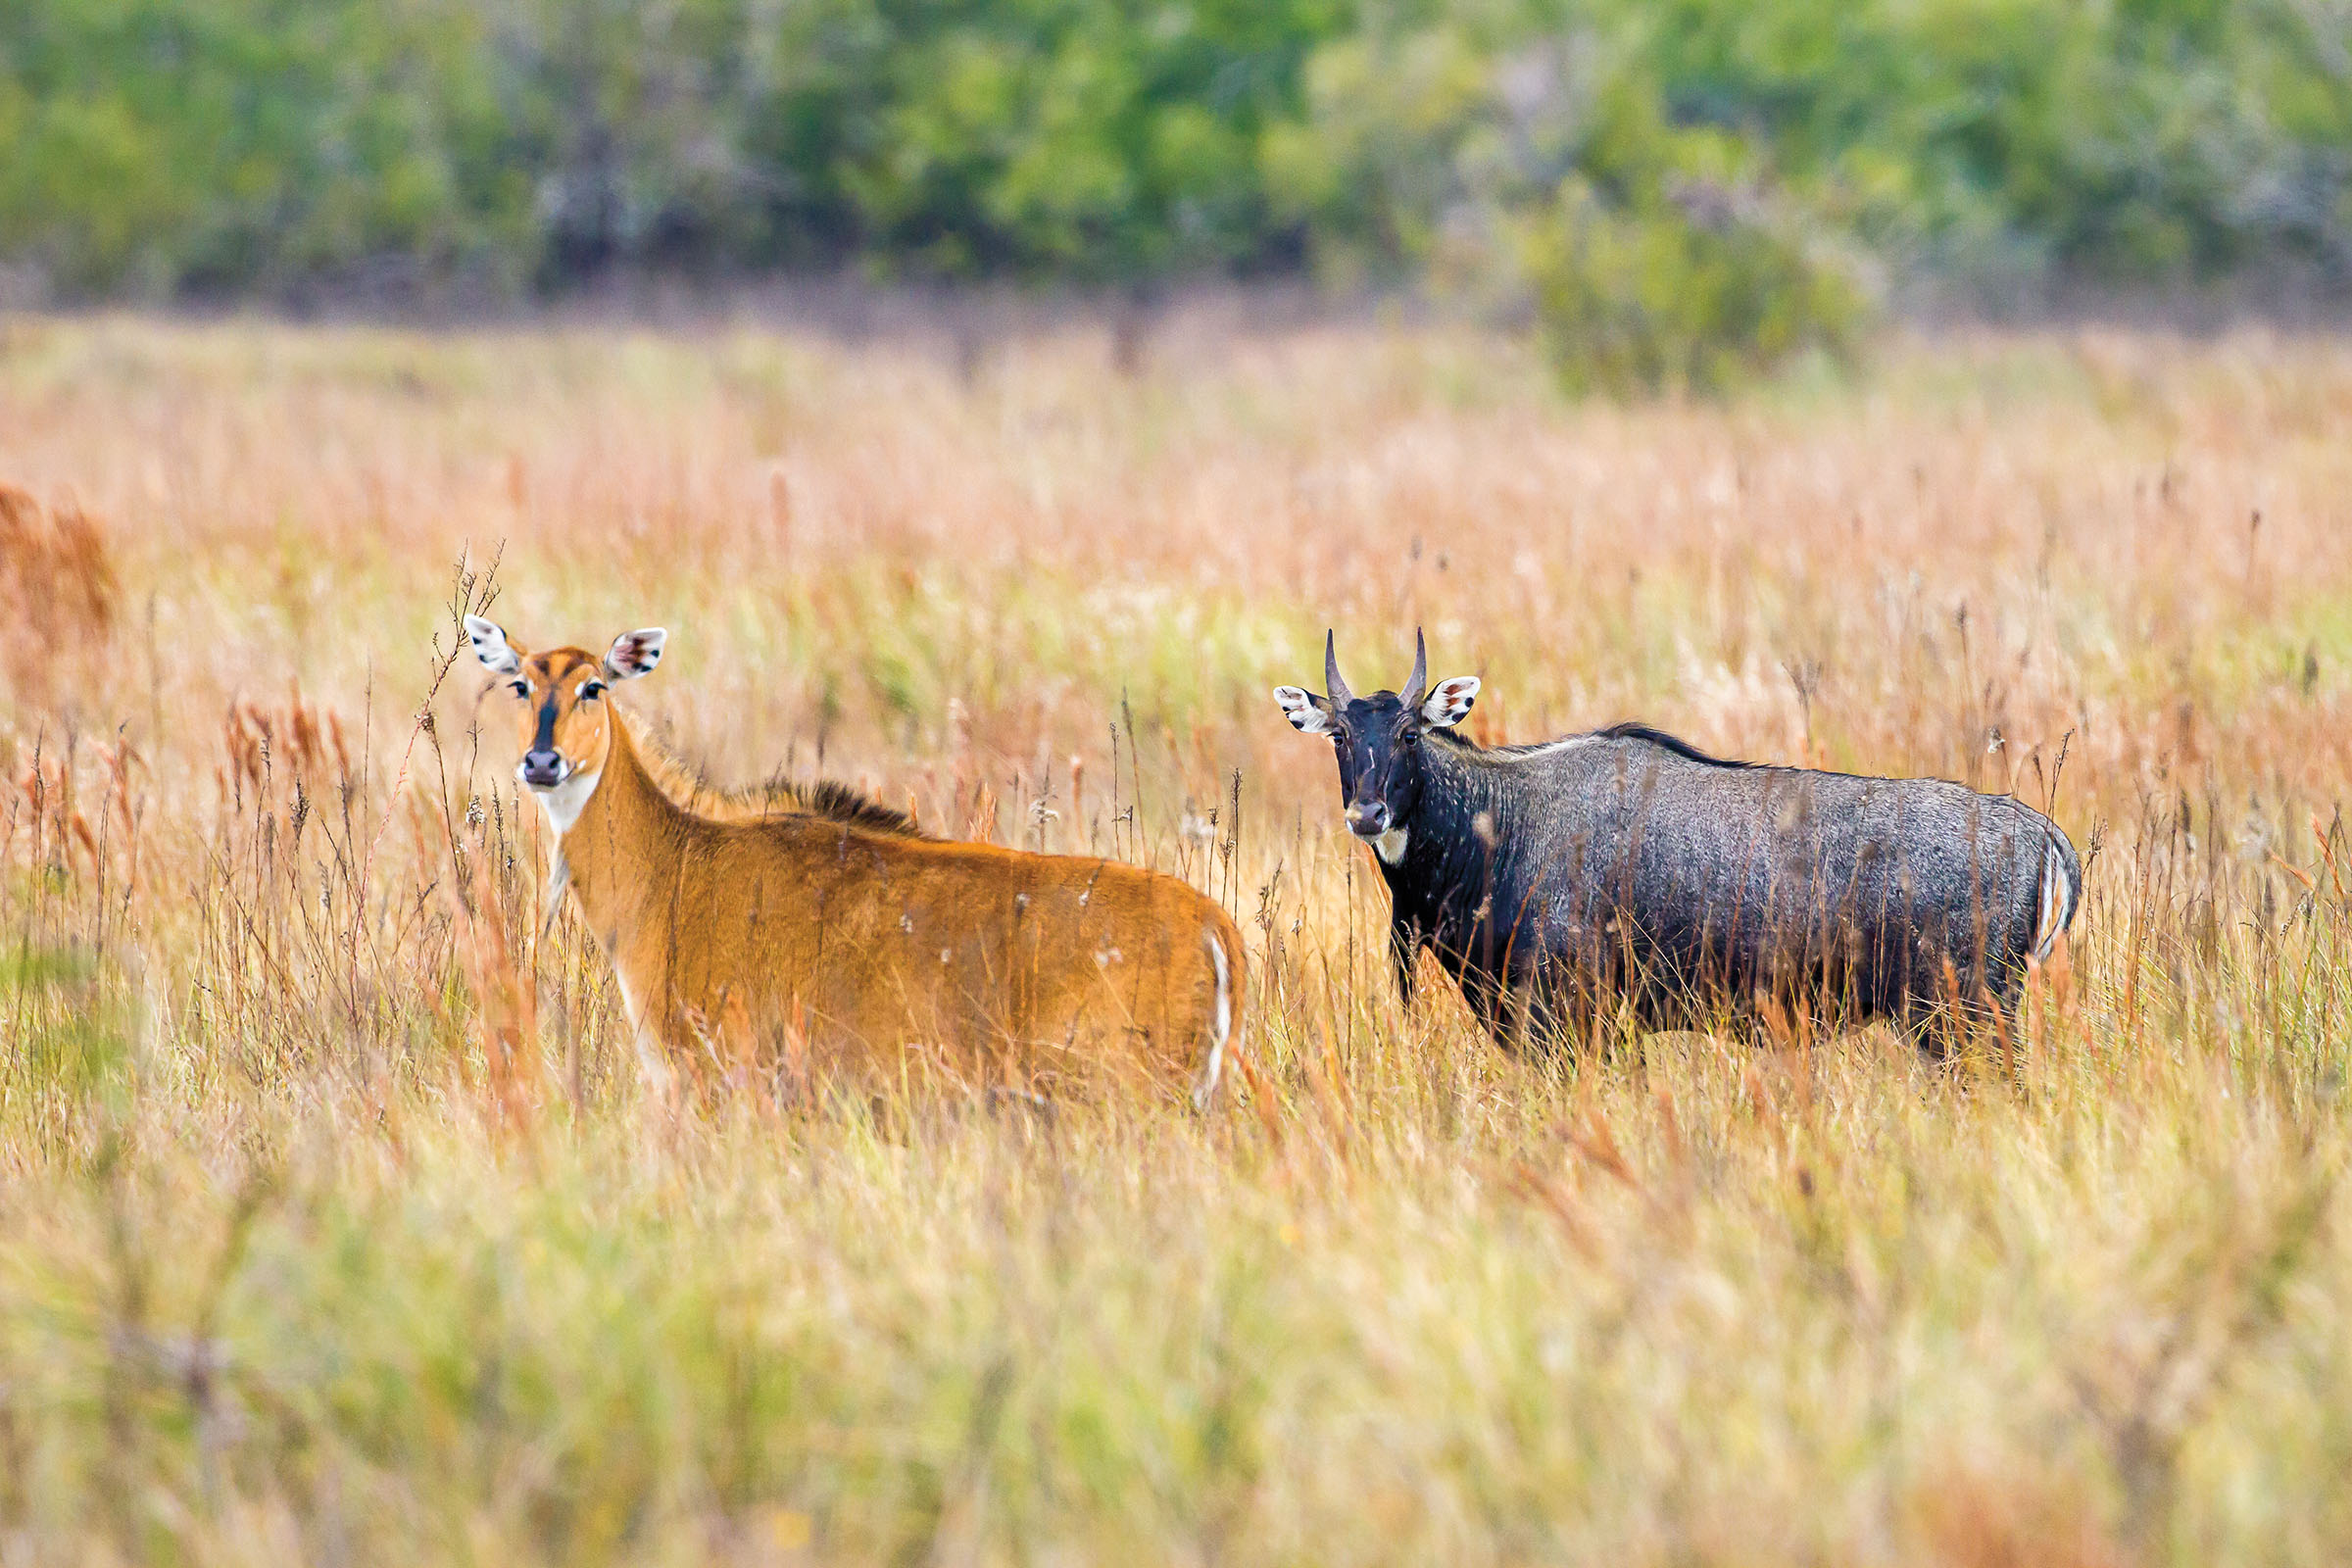 Two nilgai stand in a grassland